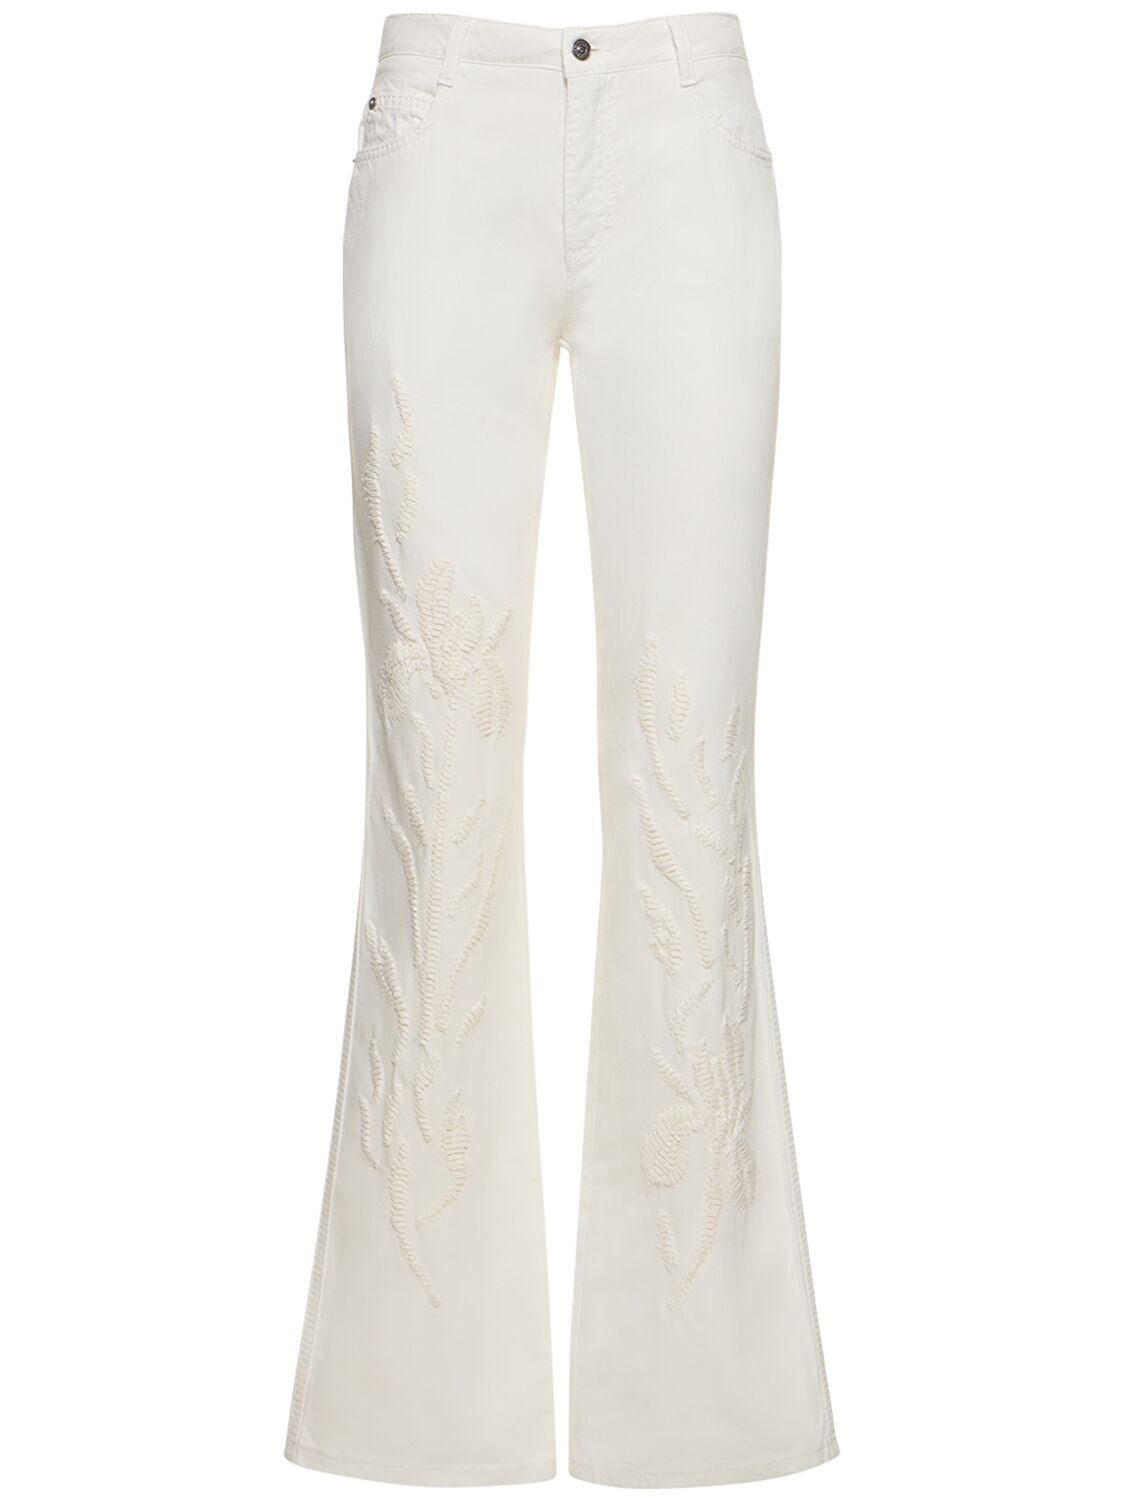 Cotton Denim Embroidered Flared Jeans